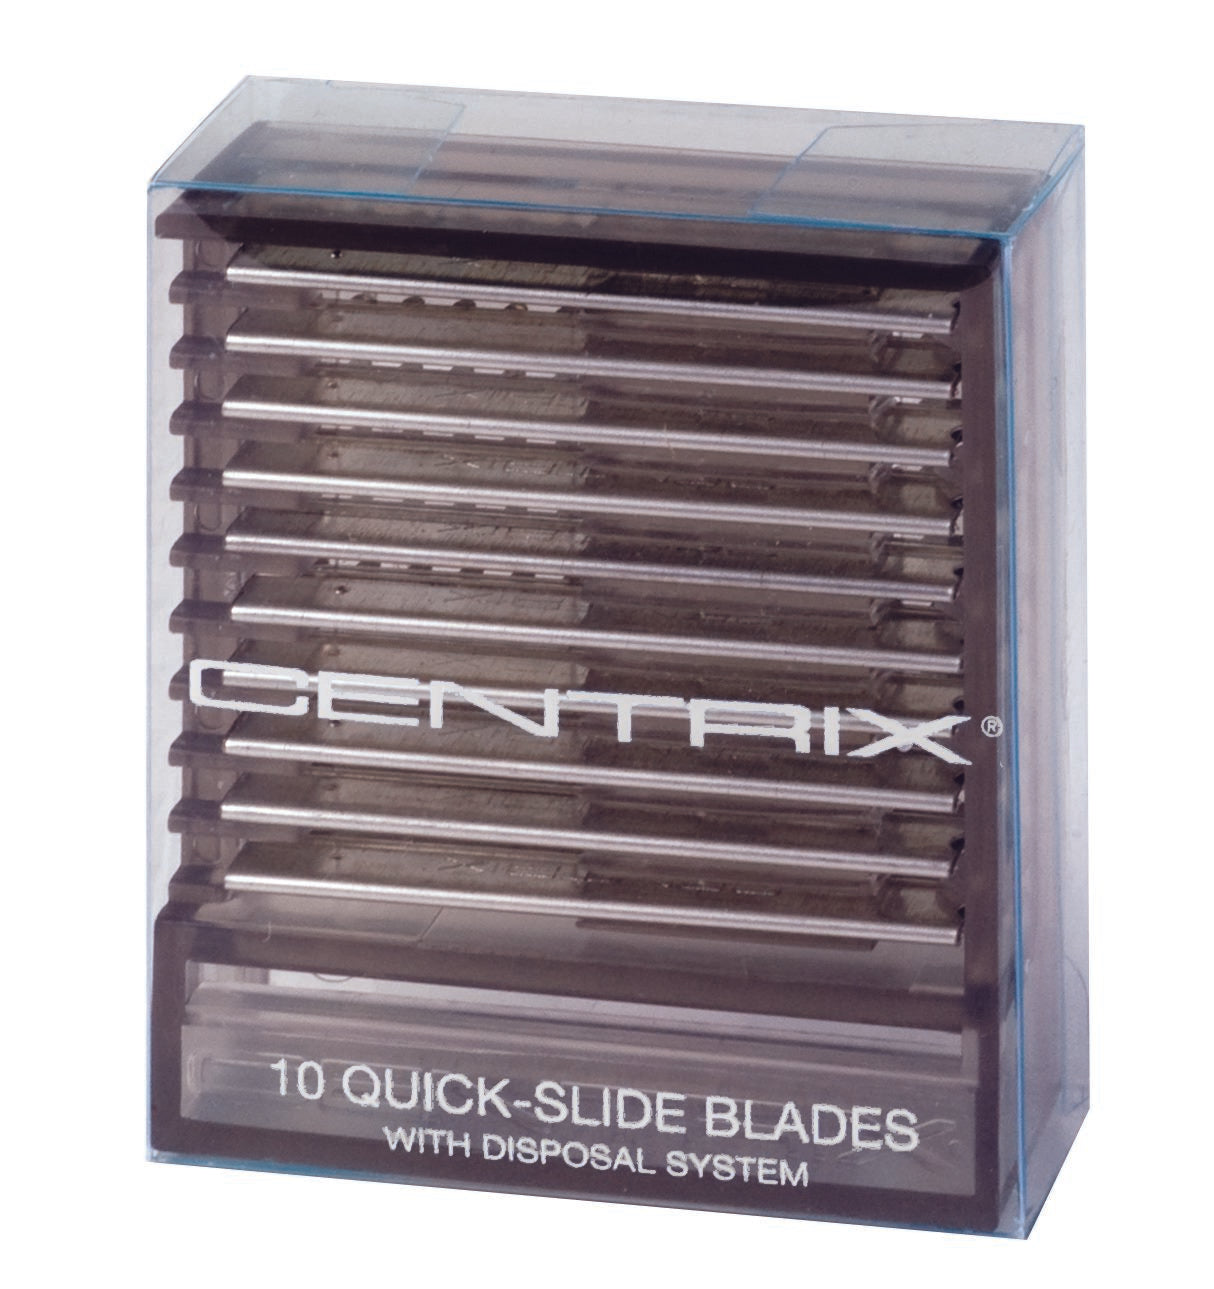 Centrix 10 Quick-Slide Blades with Disposal System